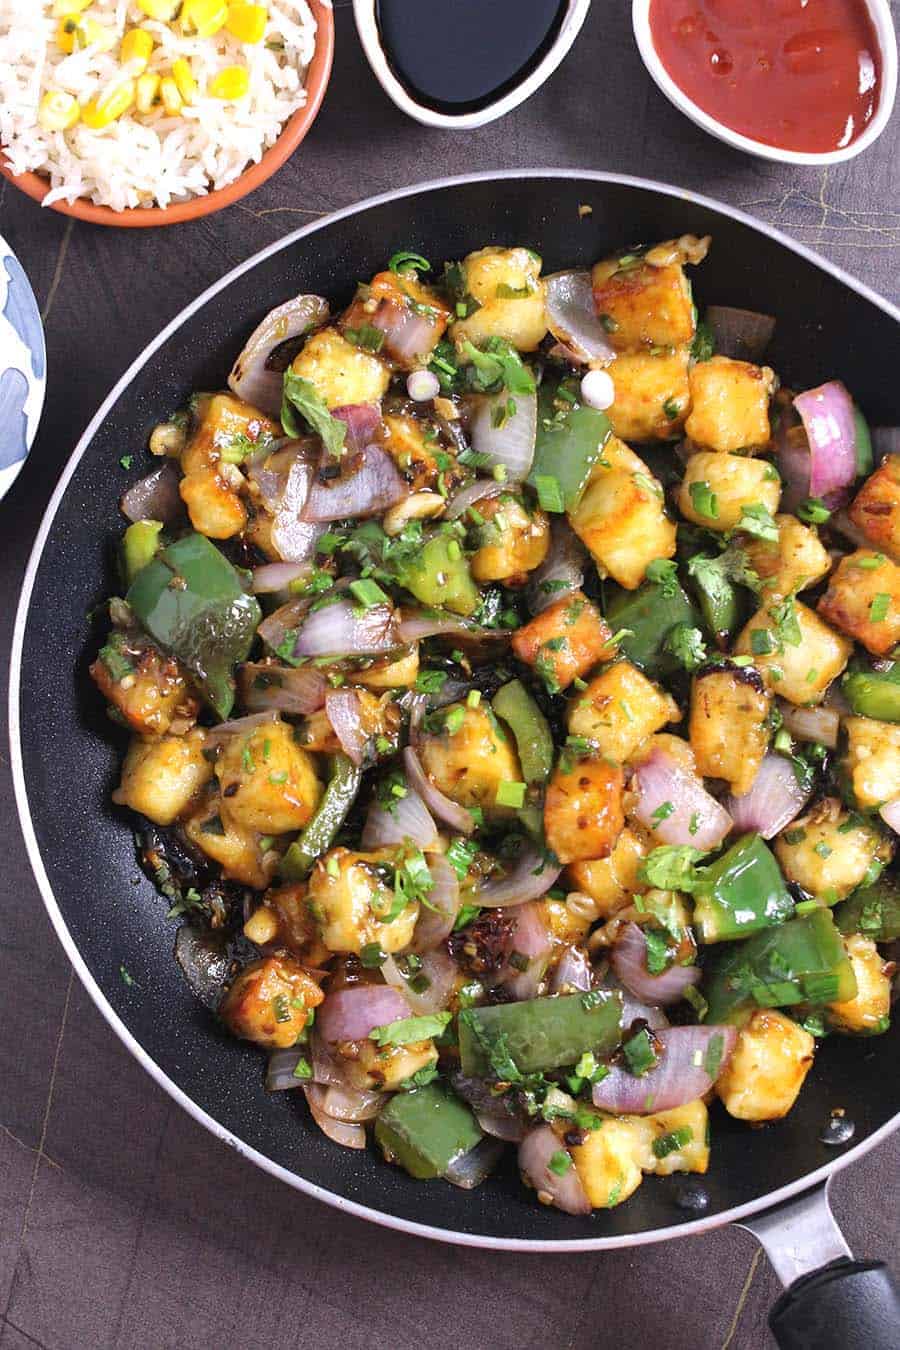 How to make easy paneer chilli? spicy paneer appetizer, starter, side dish recipe #vegetarian #indian